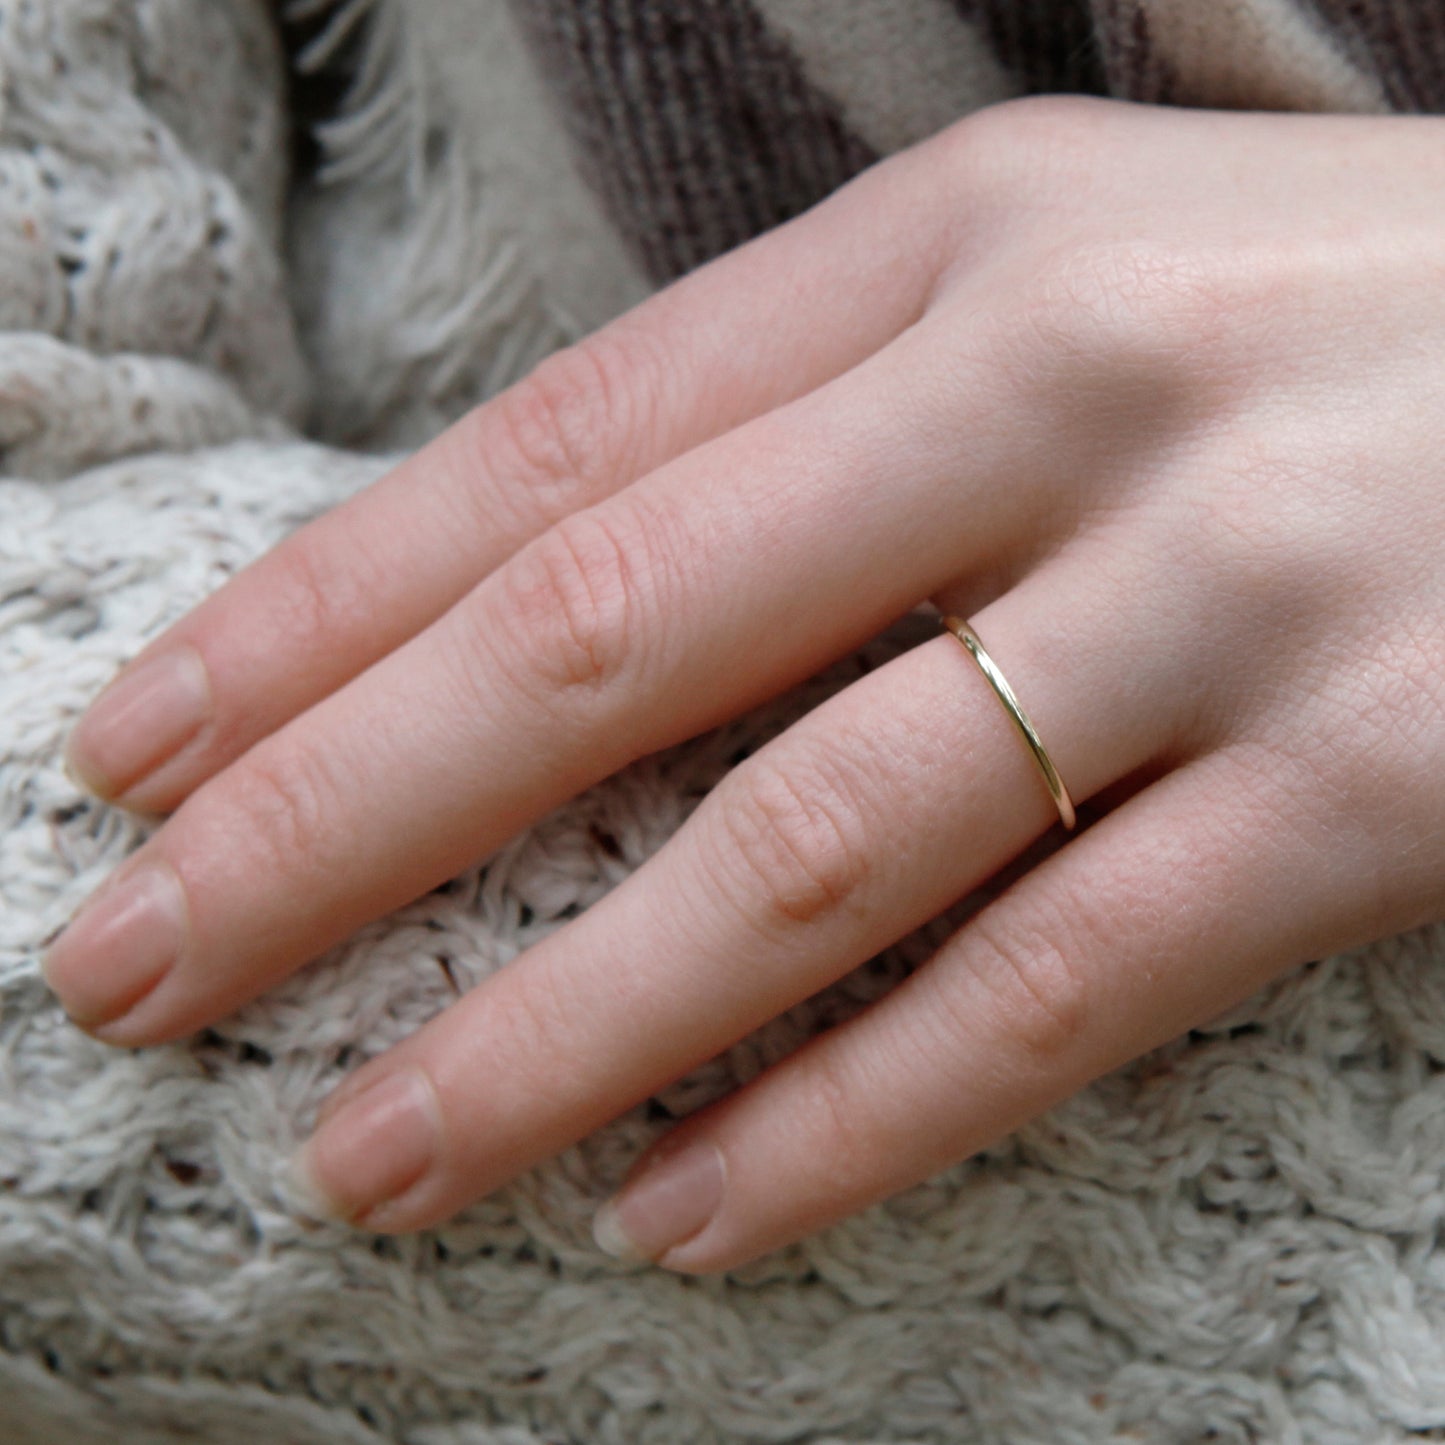 Elegant Band Ring in 9ct Gold - 1.5mm - rose - Hammered or Smooth